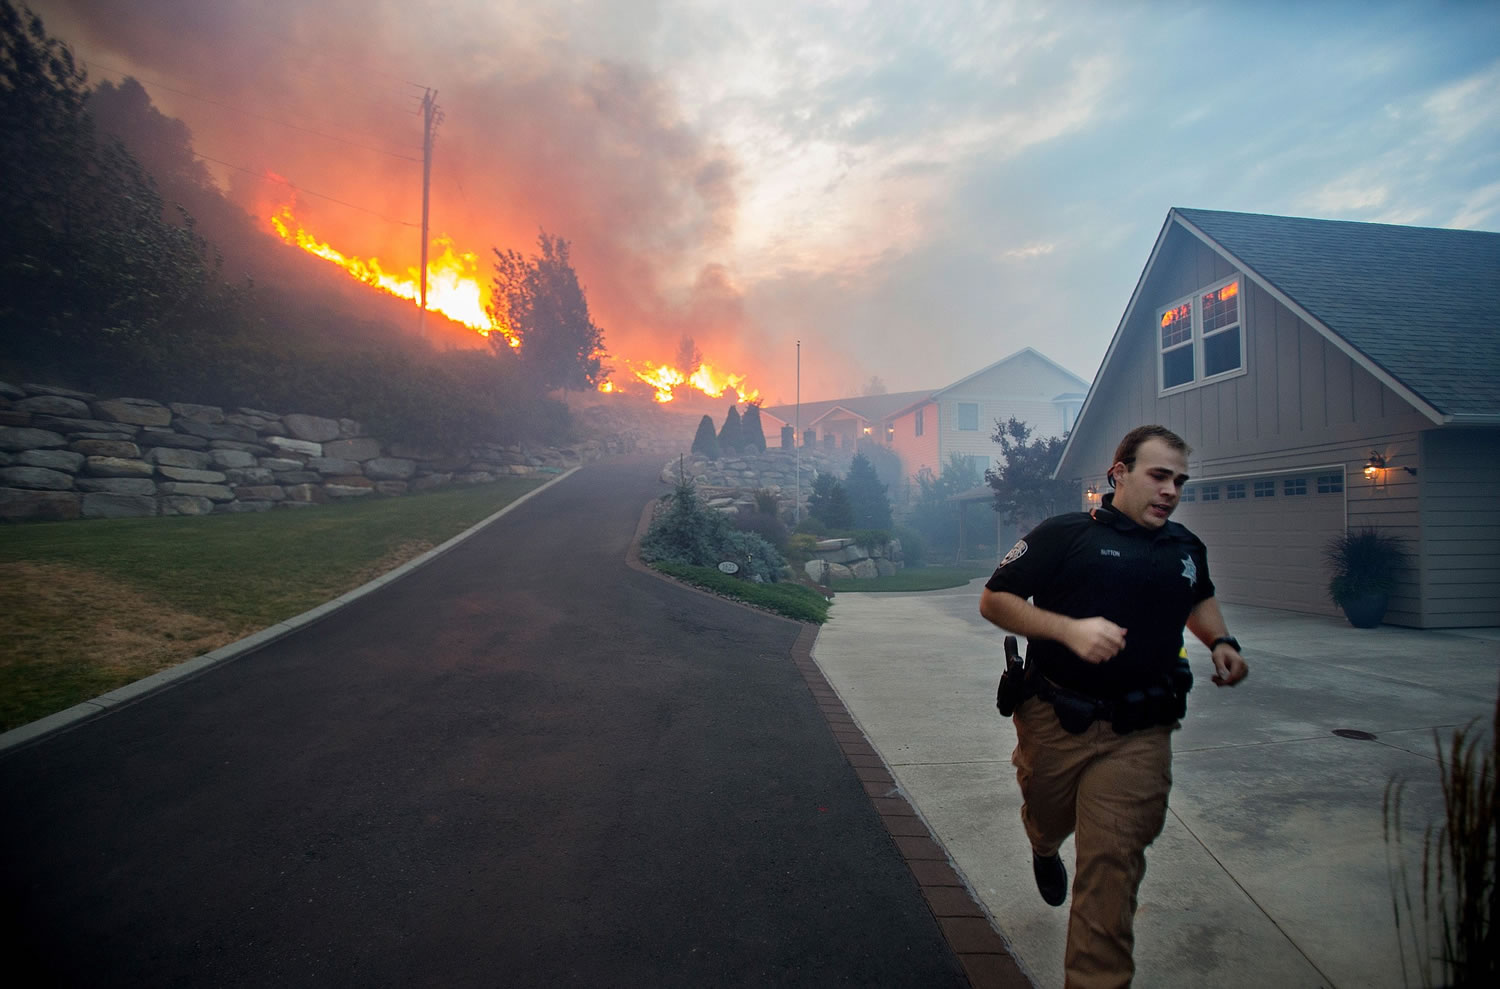 A Chelan County Sheriff's deputy races to check that all residents have left their homes Sunday as flames approach houses at Quail Hollow Lane in Wenatchee.